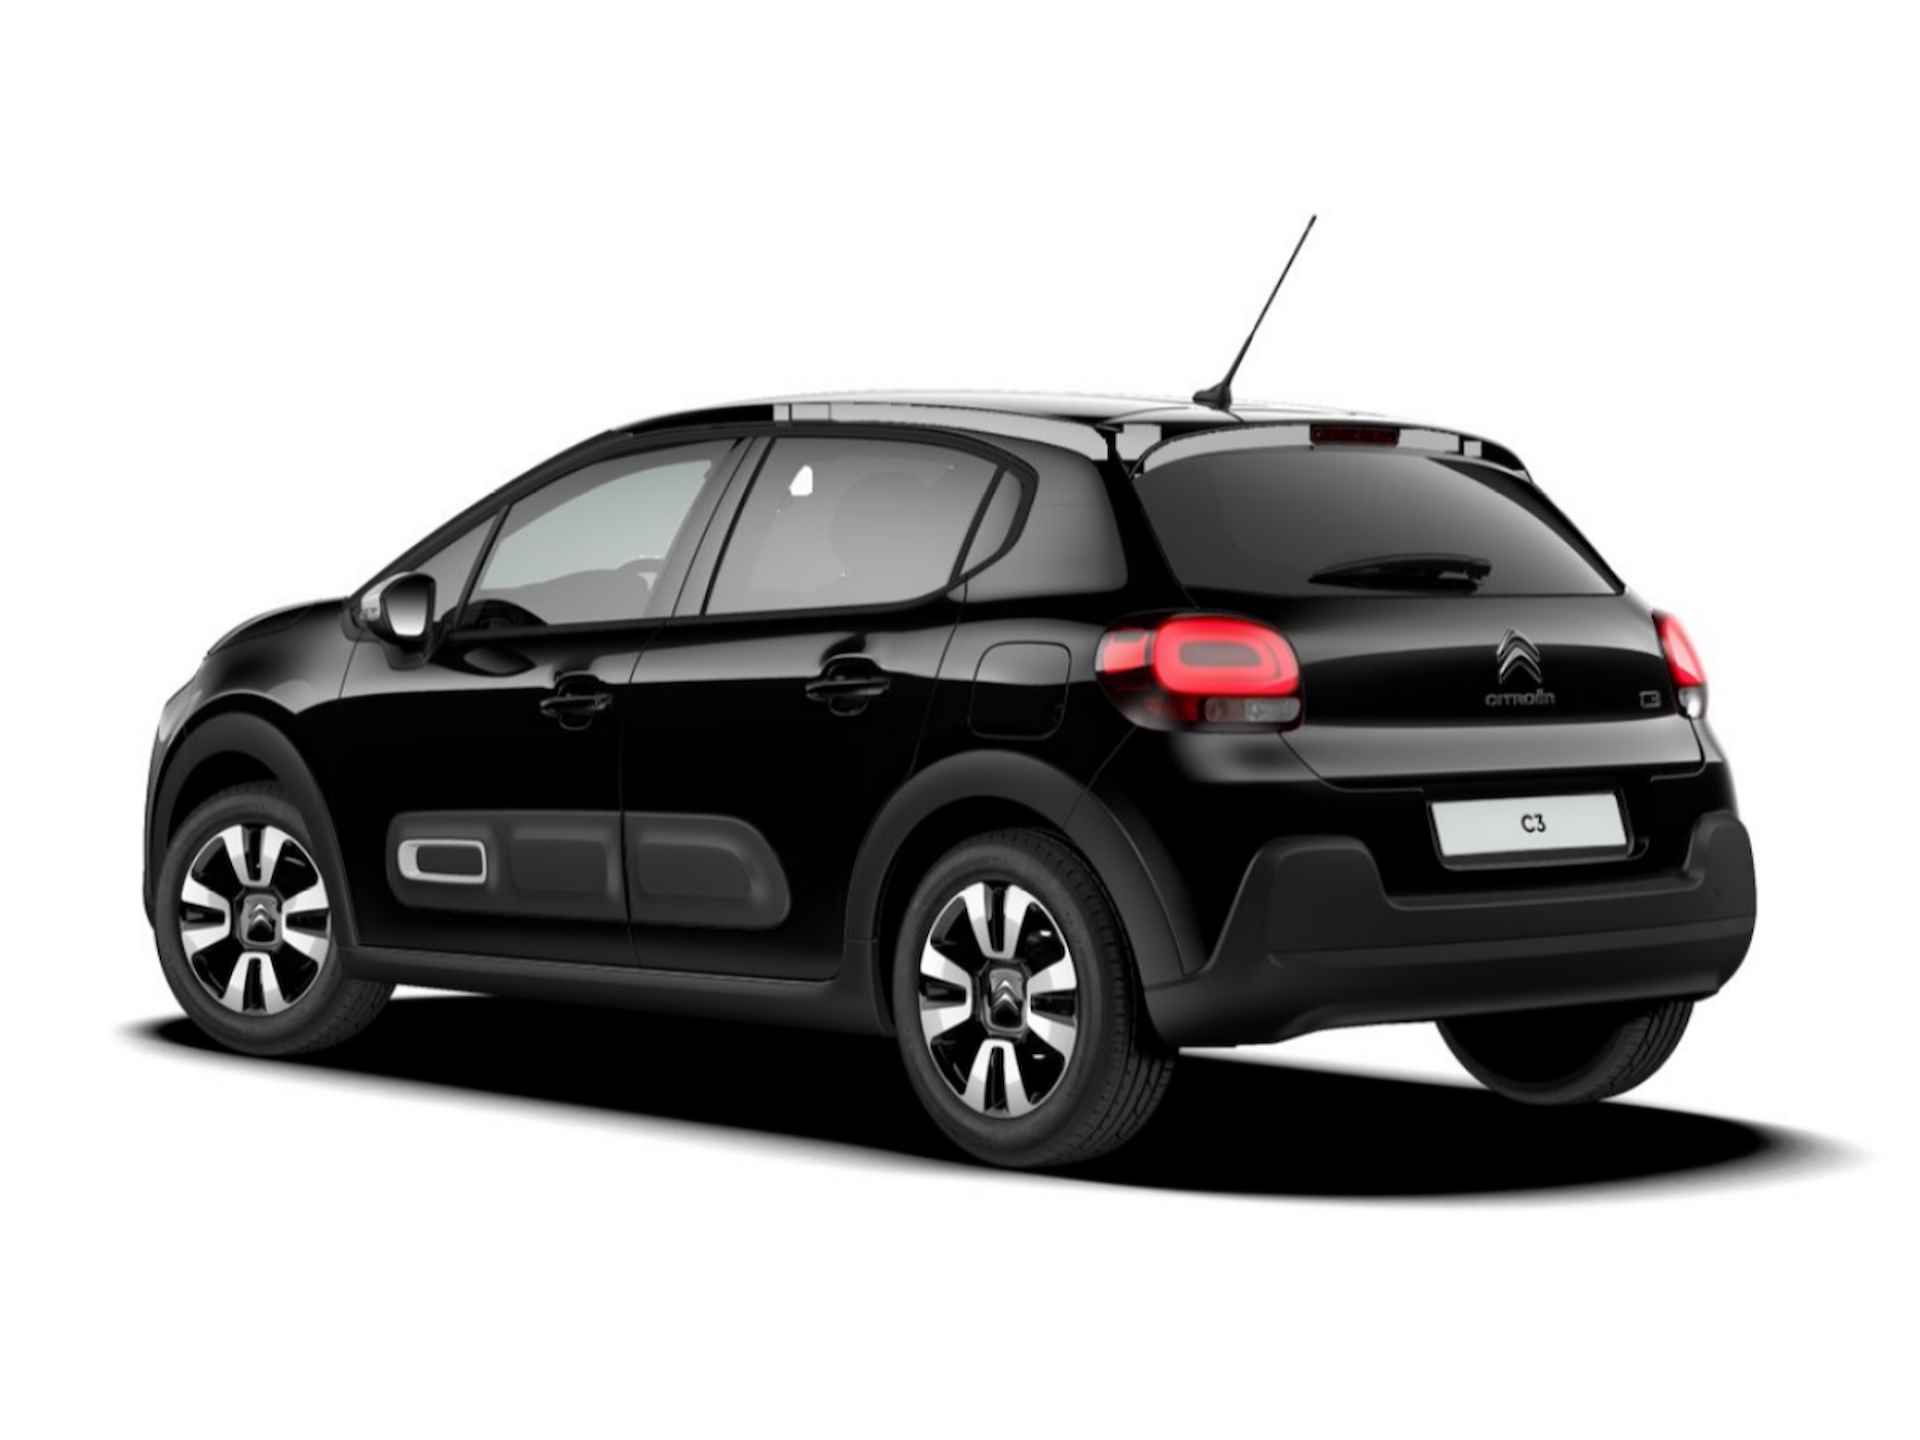 Citroën C3 1.2 PureTech Feel Edition | Ambiance Wood | Connect Nav DAB + 7” Touchscreen - 4/8